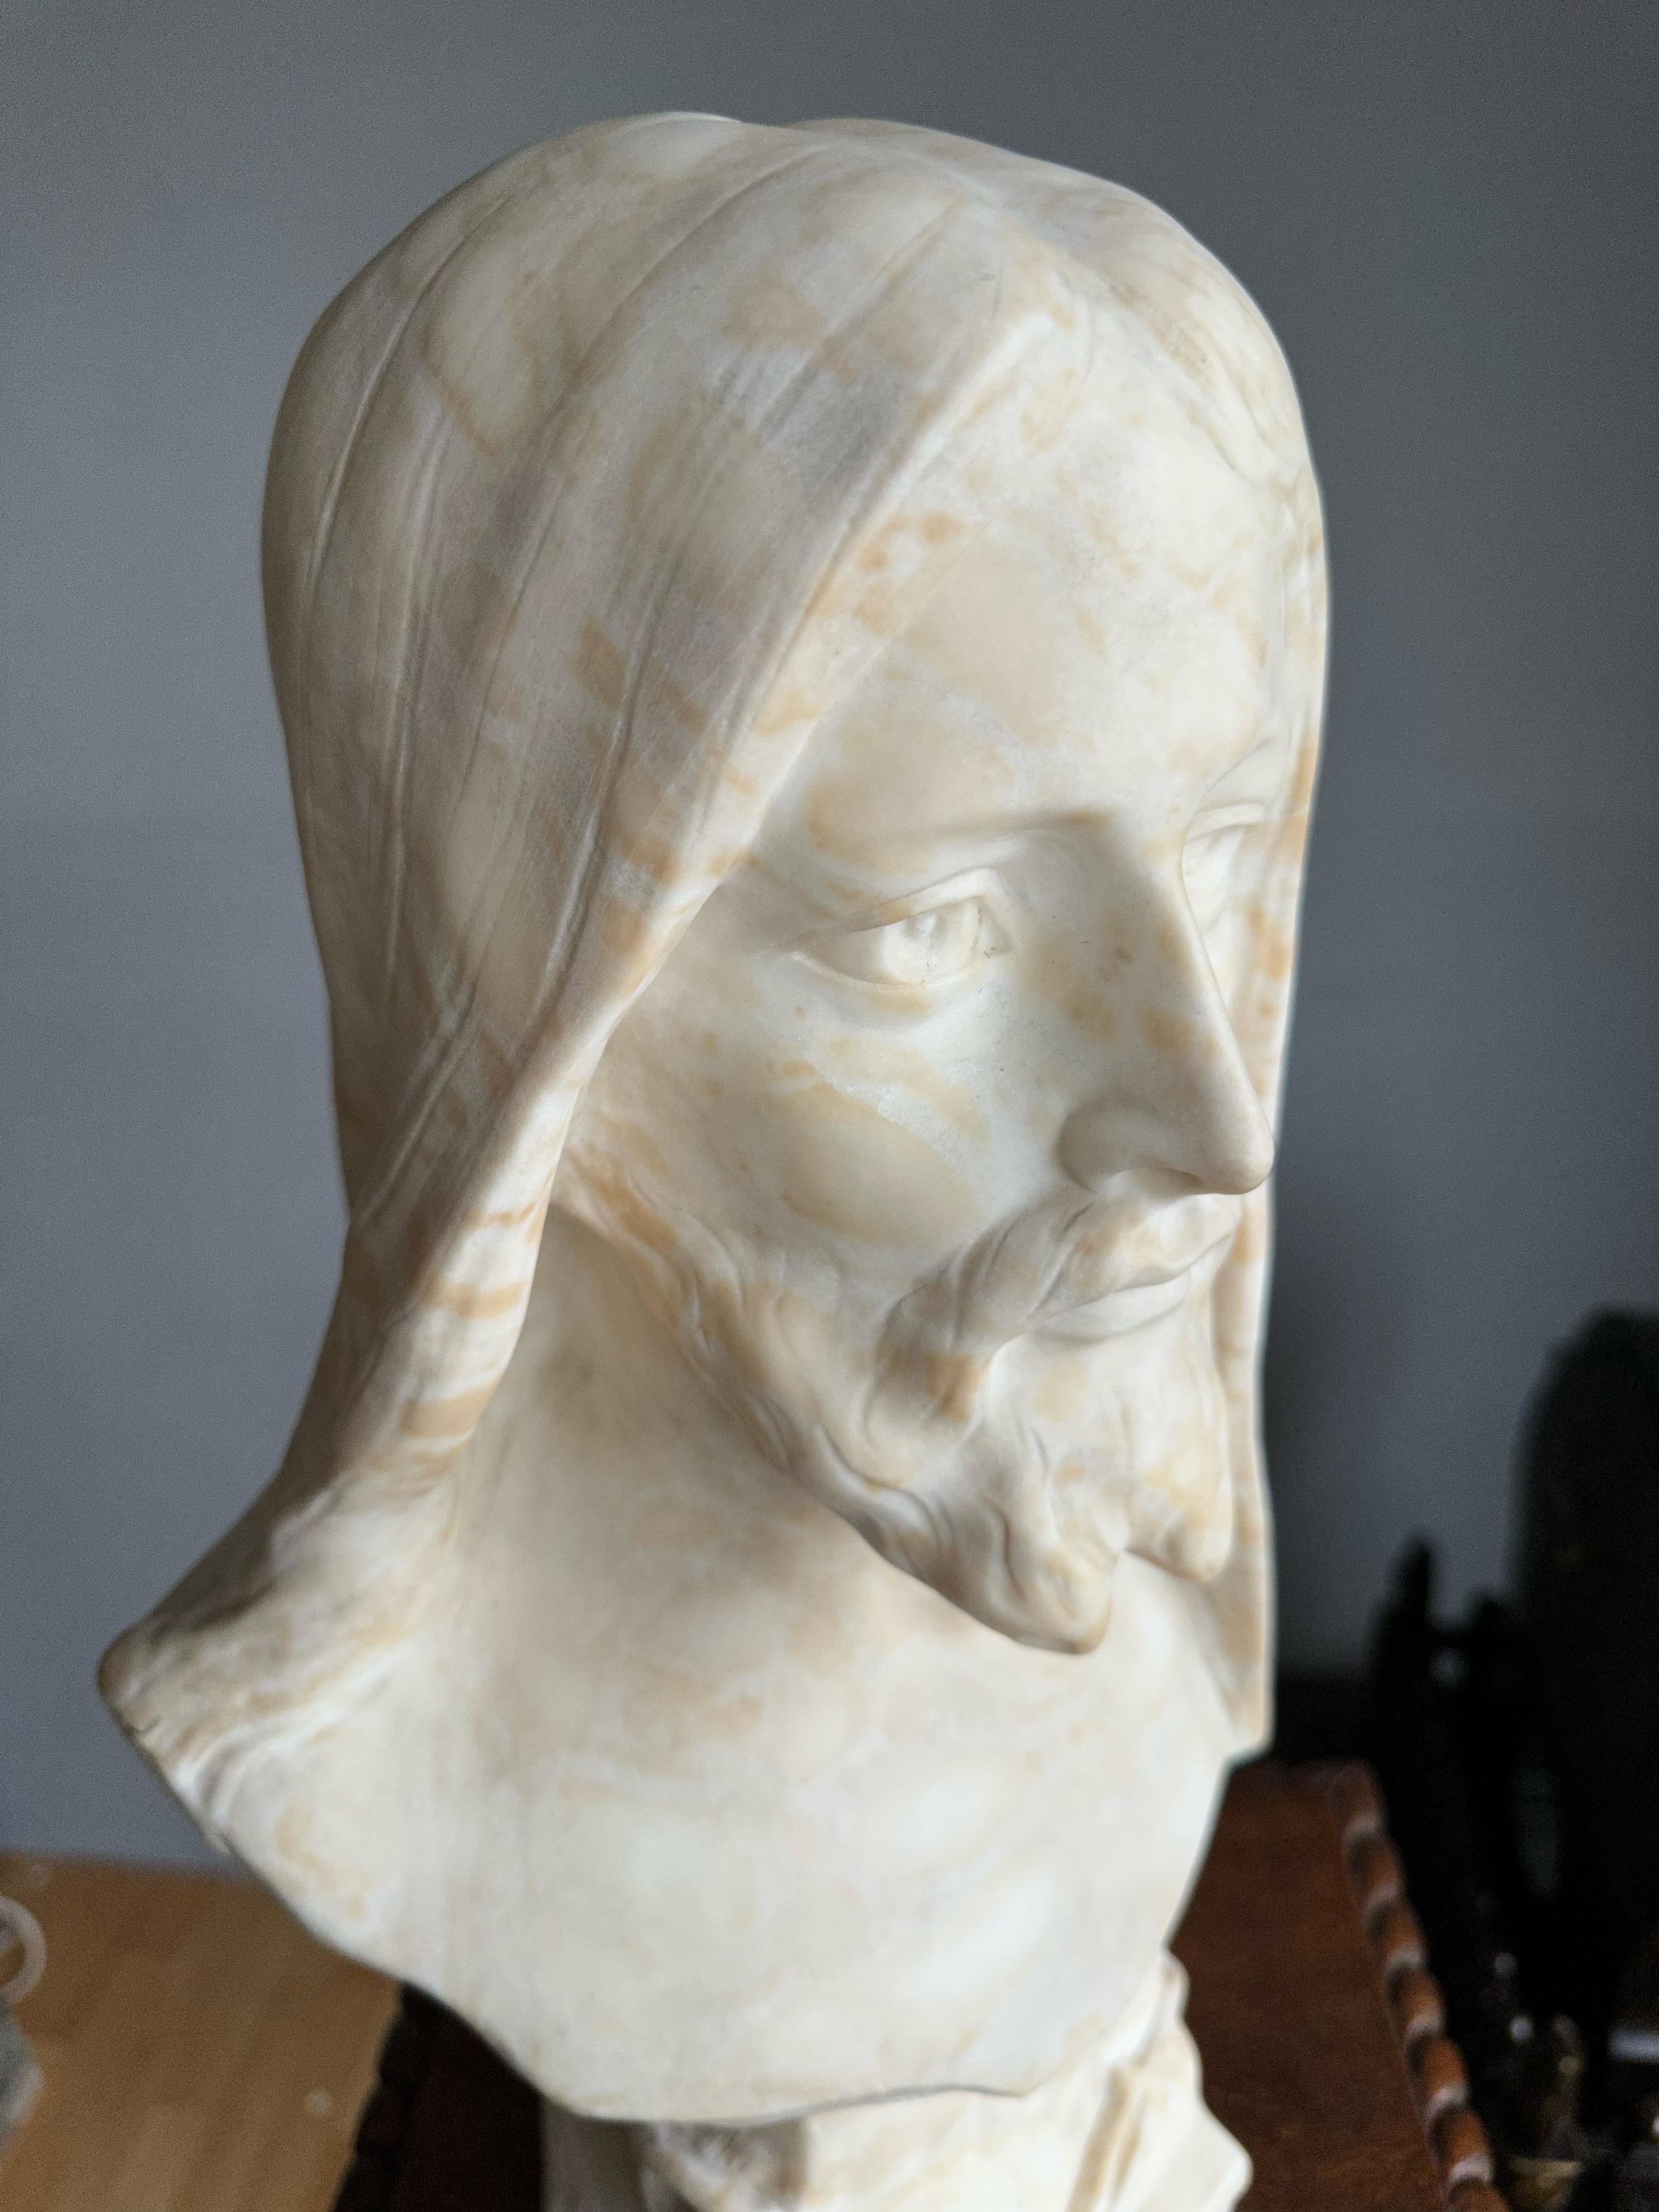 Italian Antique, Early 1900 Large Hand Carved Alabaster Sculpture / Bust of Jesus Christ For Sale